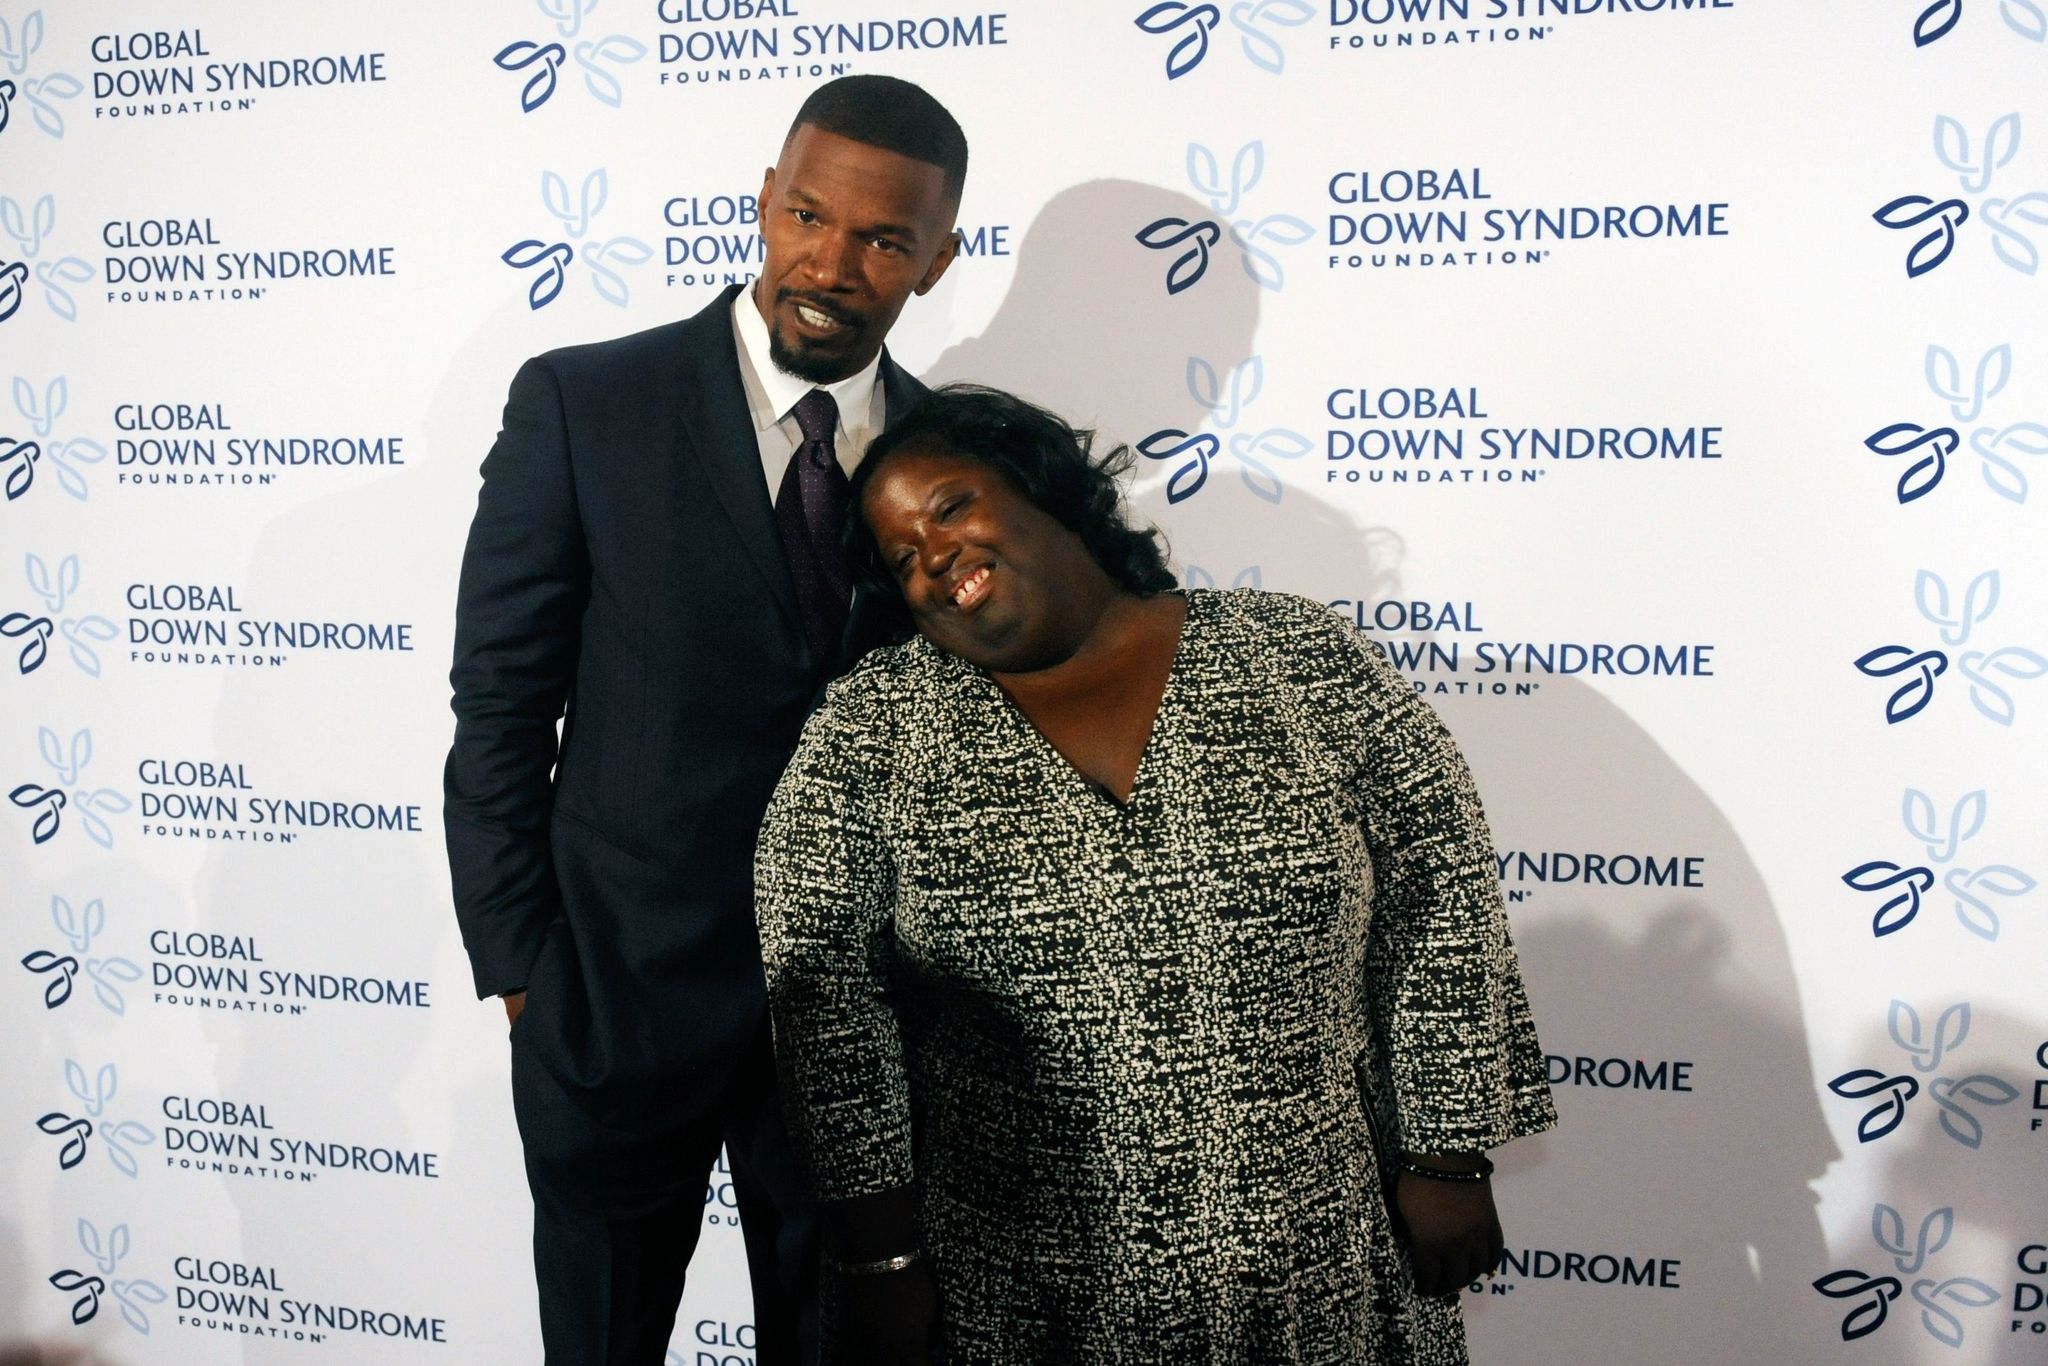 Jamie Foxx and DeOndra Dixon during the 2016 Global Down Syndrome Foundation "Be Beautiful, Be Yourself" fashion show at the Colorado Convention Center in Denver, Colorado, on November 12, 2016. | Source: Getty Images